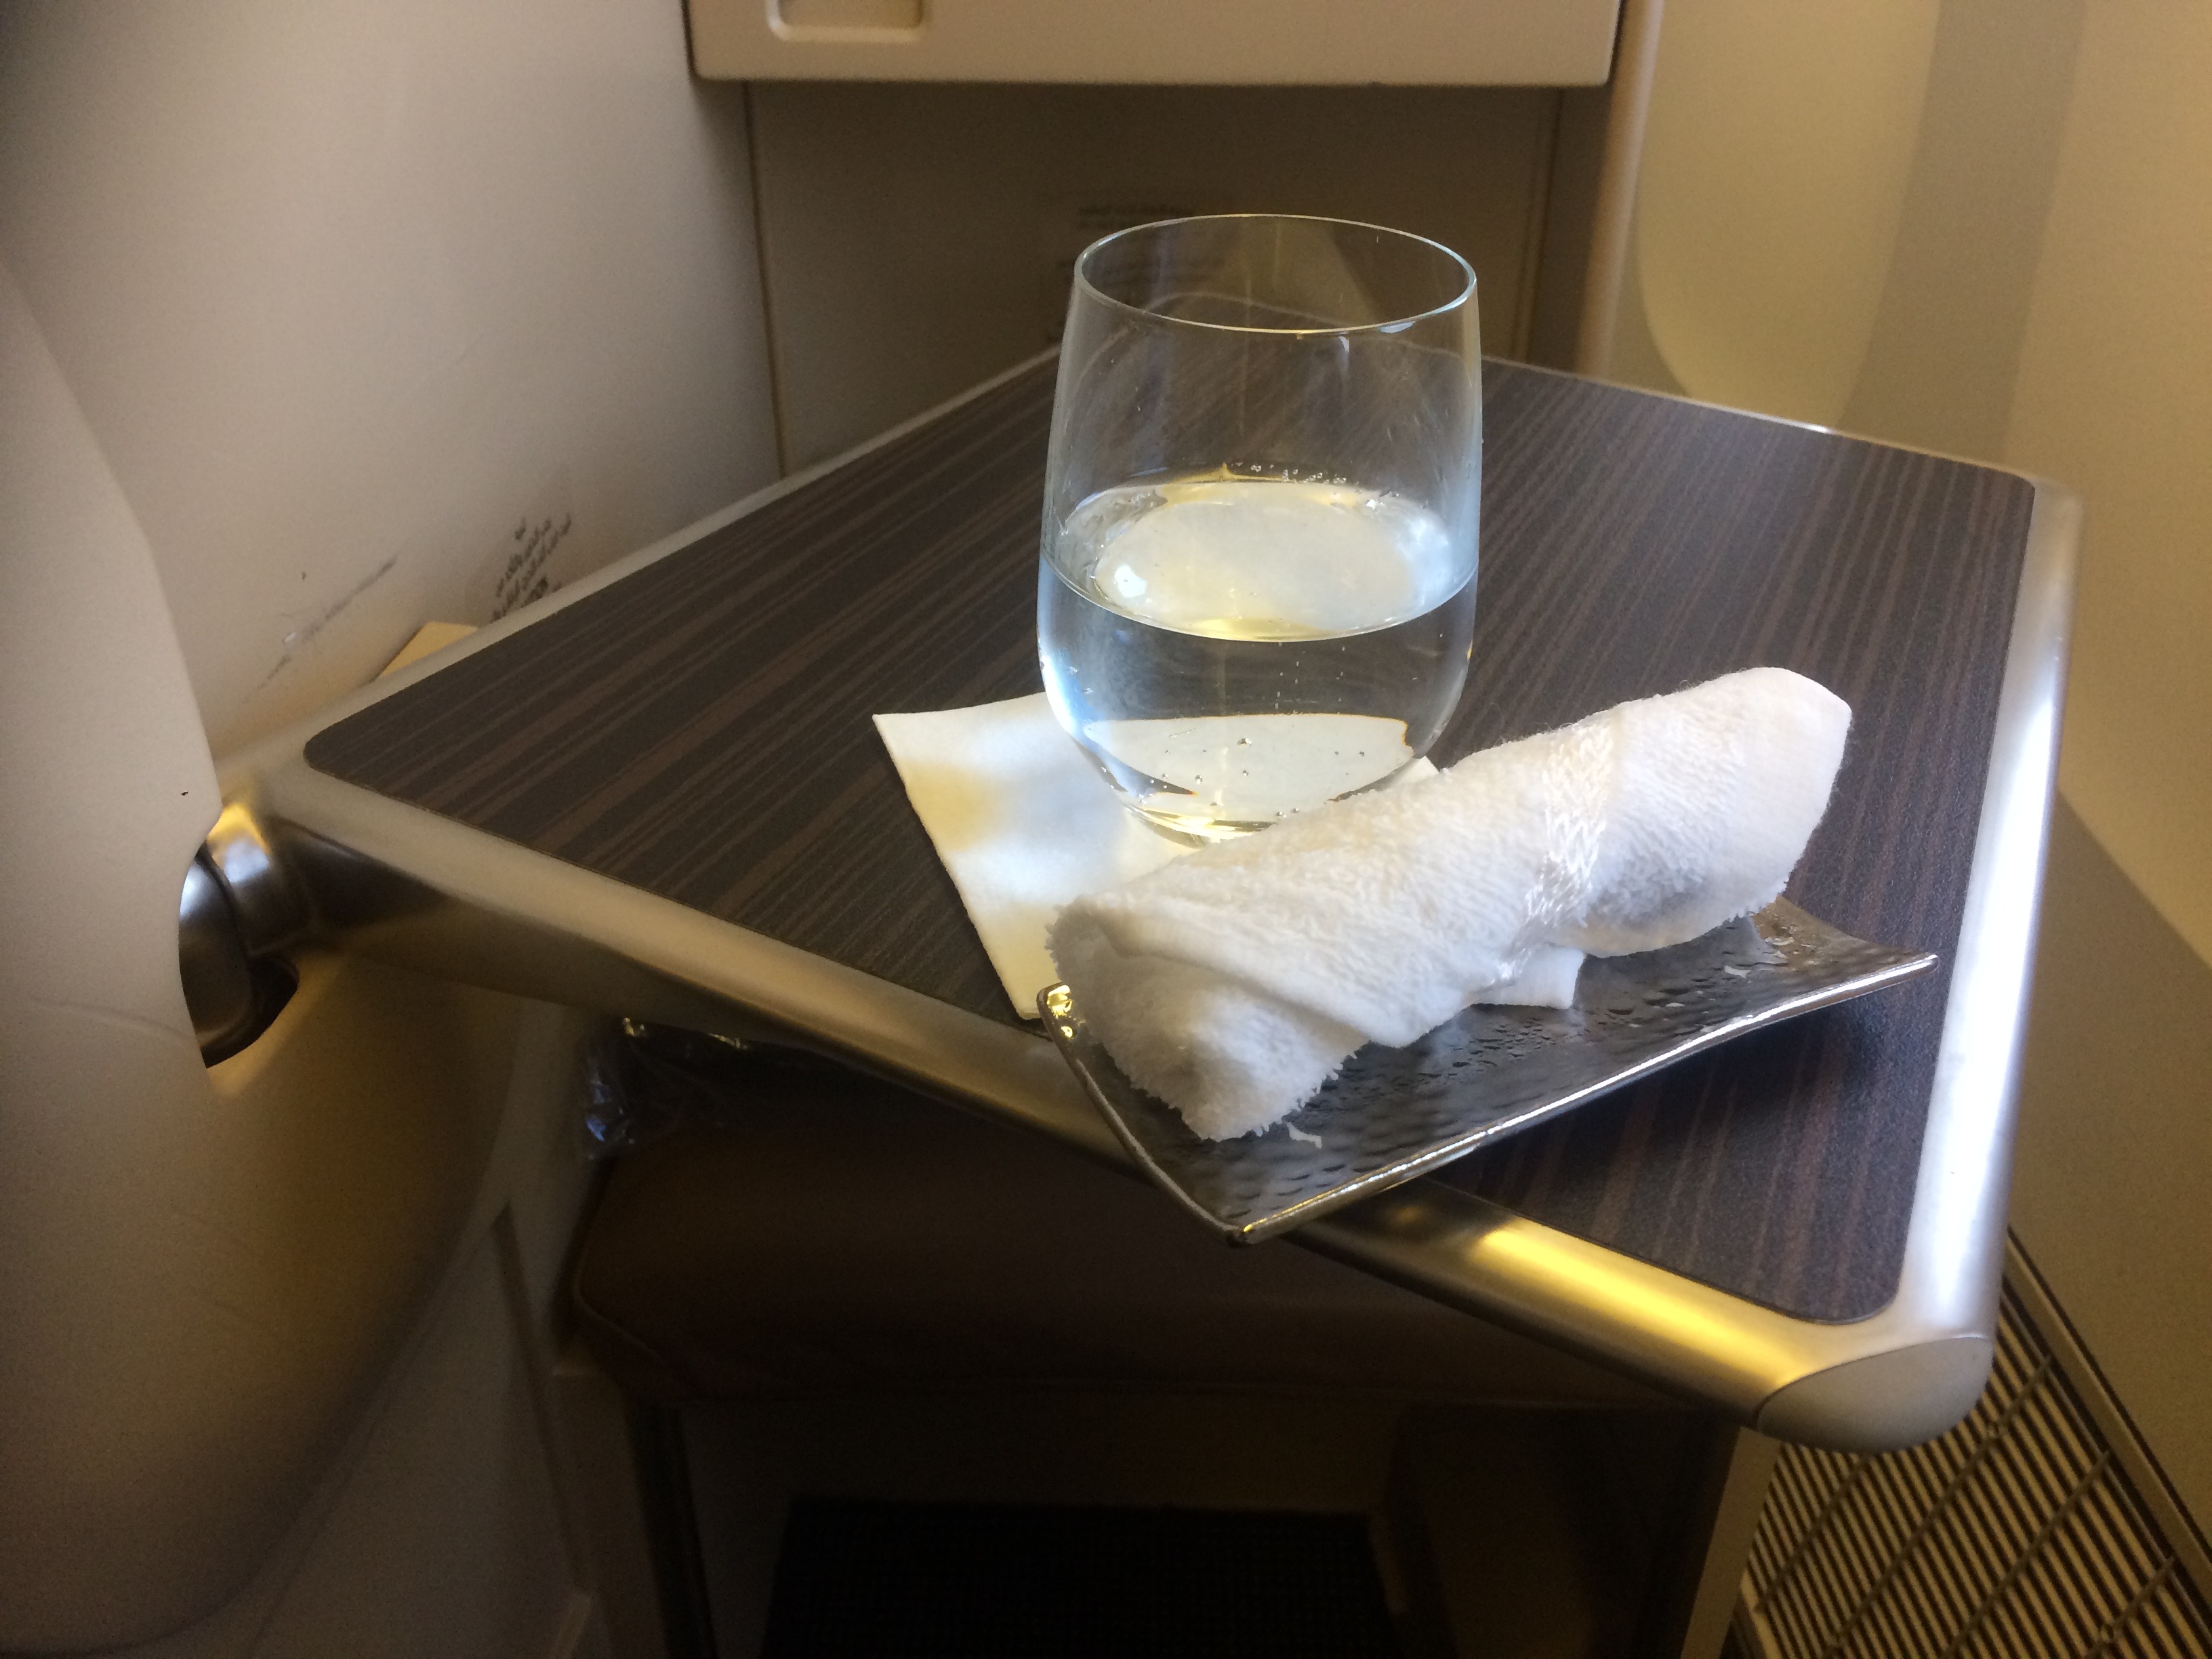 a glass of water and a towel on a tray